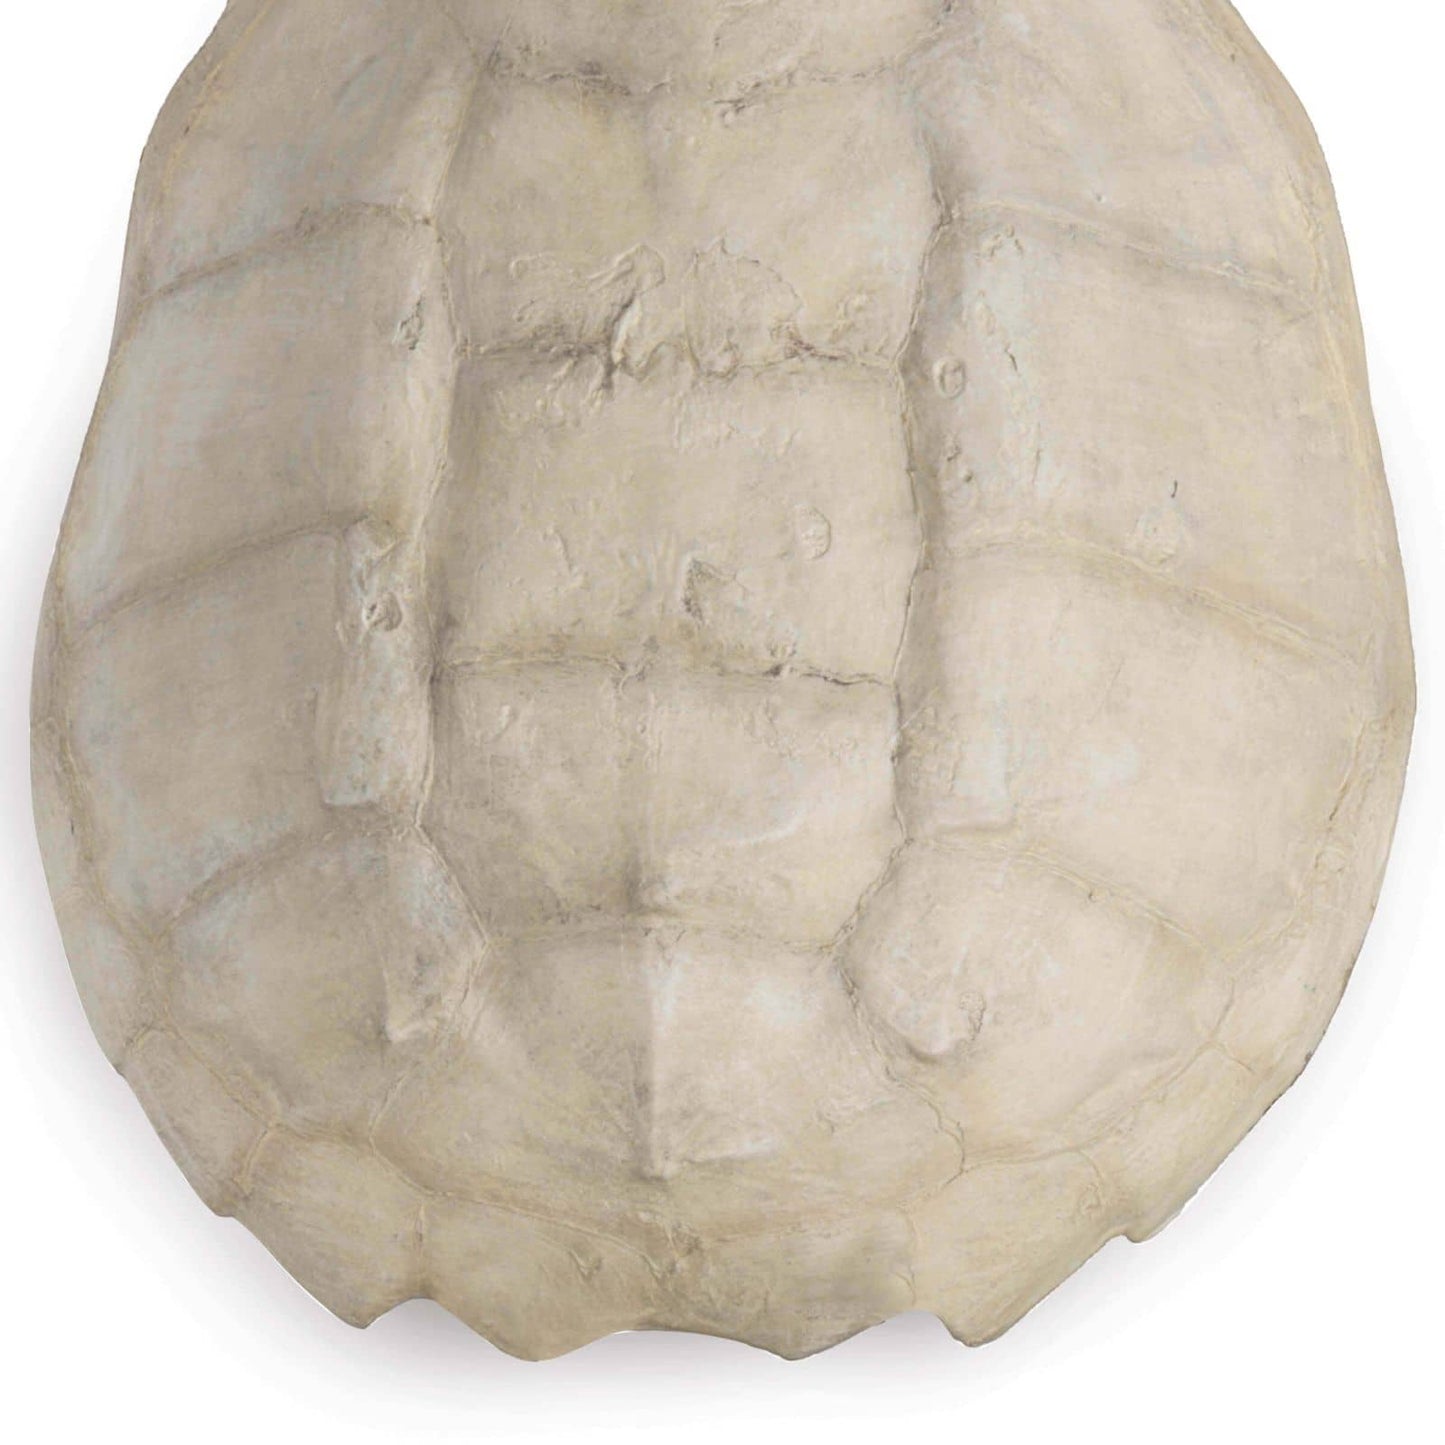 Regina Andrew Turtle Shell Accessory in Bleached